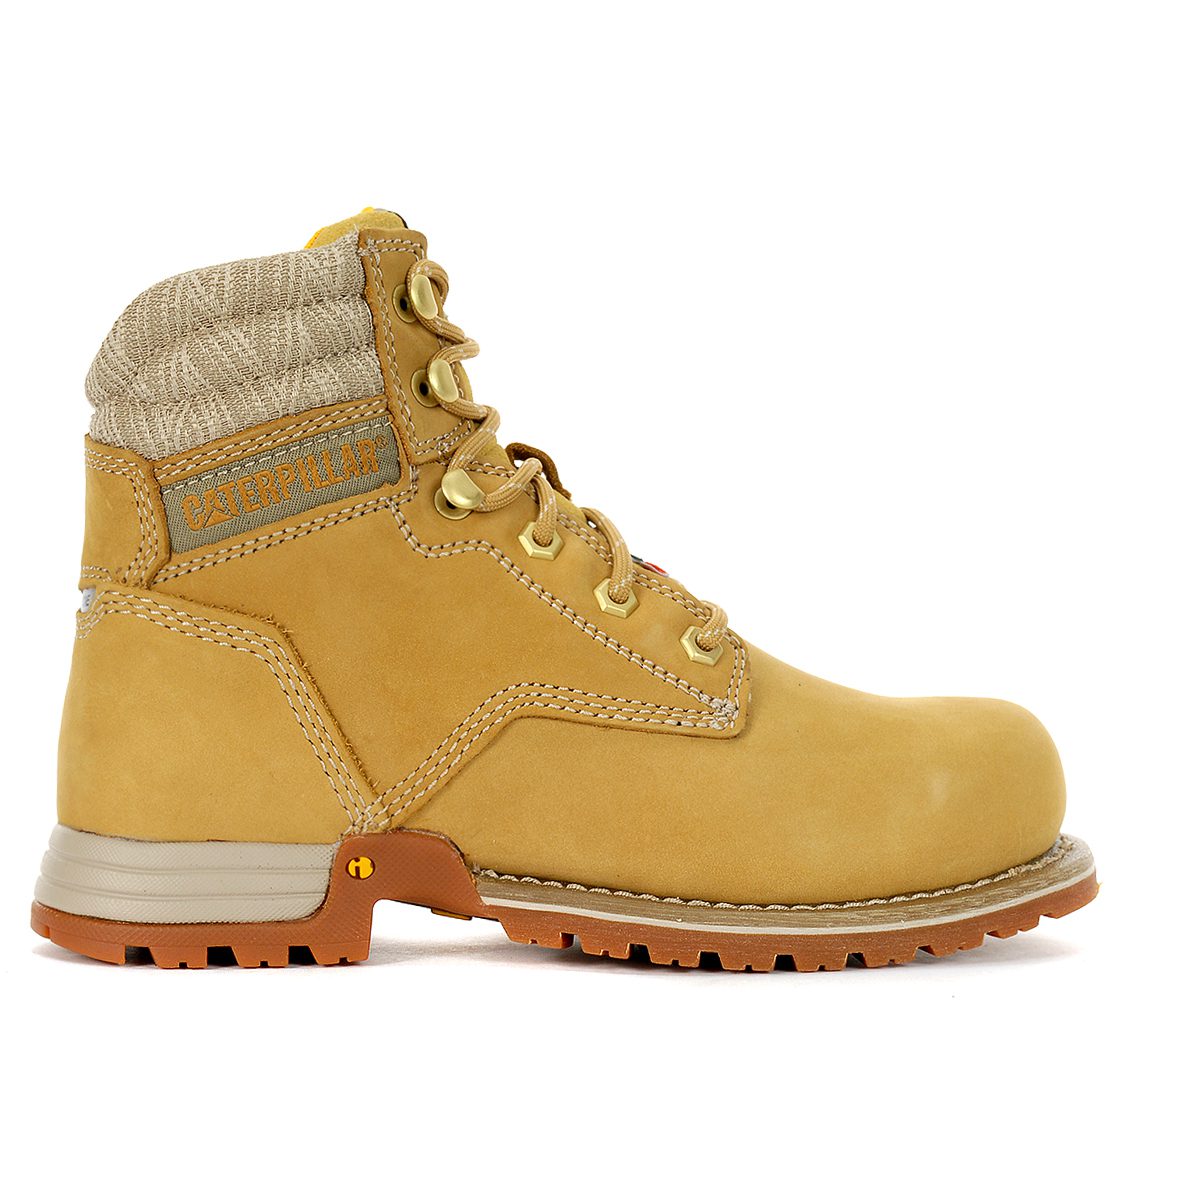 csa approved boots womens